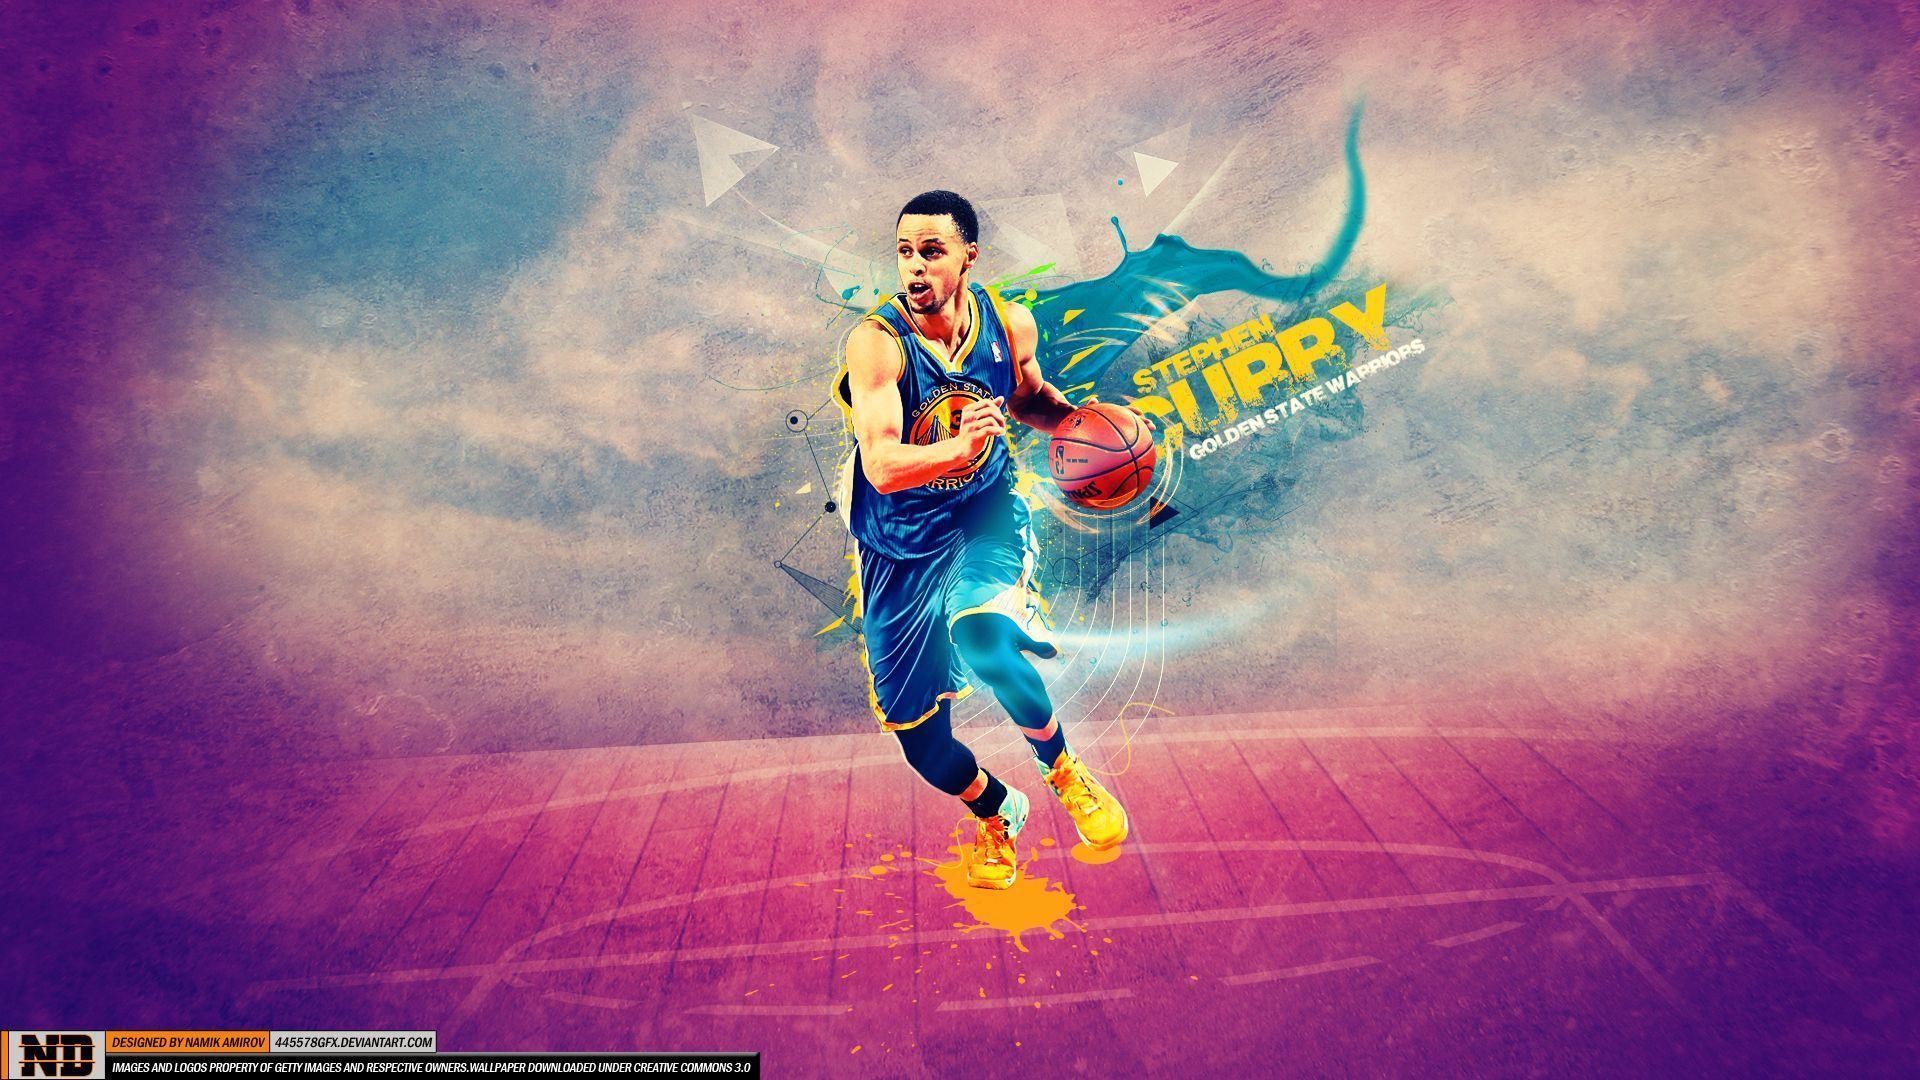 1920x1080 Stephen curry wallpaper, Stephen Curry and Kyrie irving on Pinterest